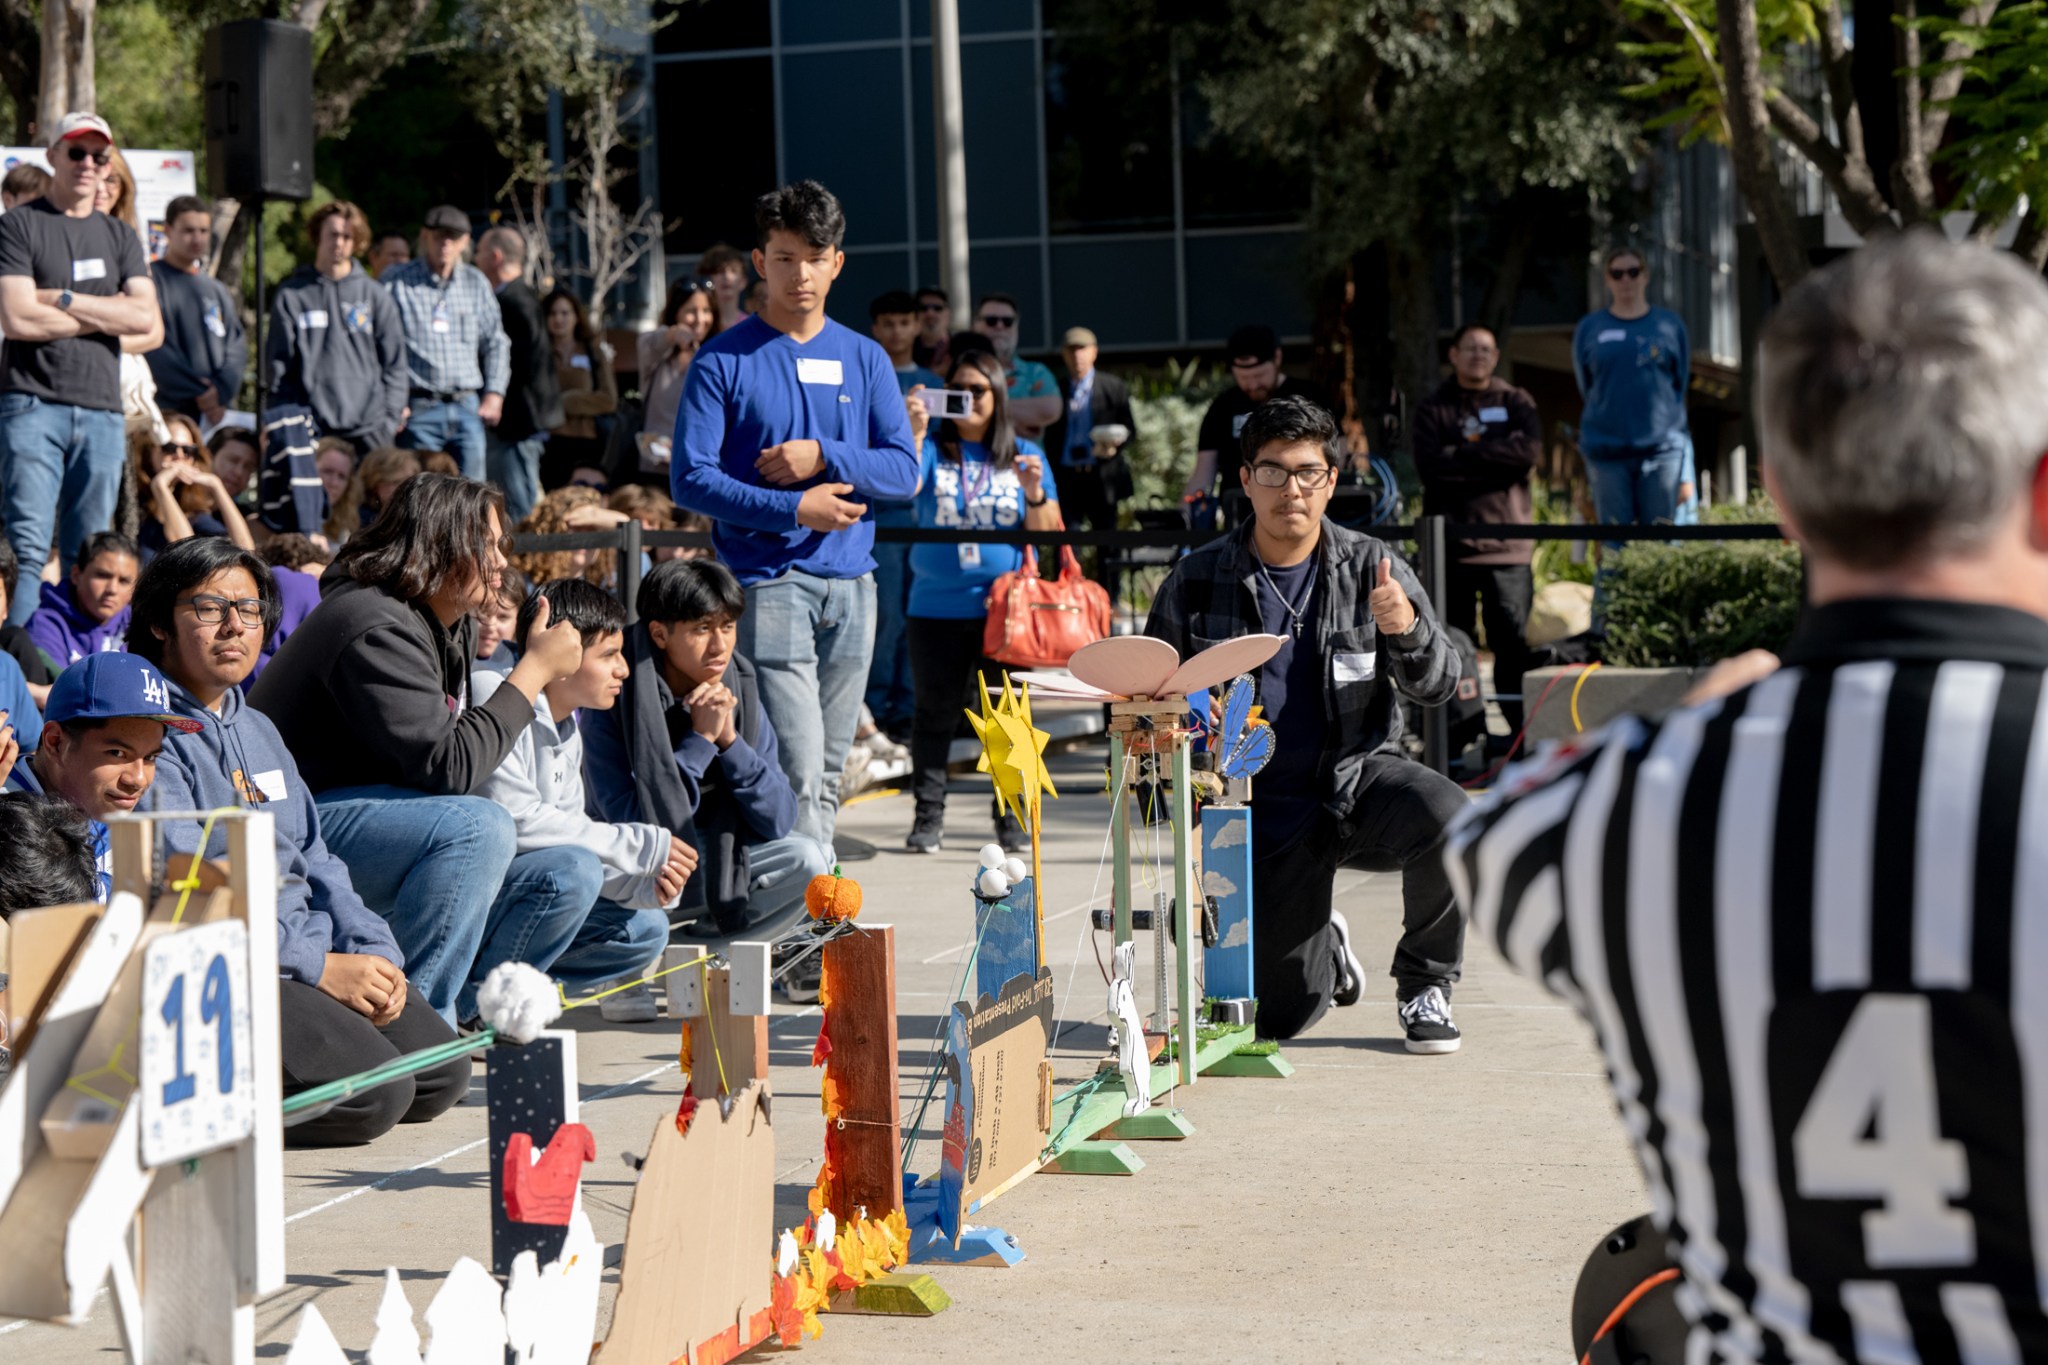 JPL’s Paul MacNeal started the Invention Challenge so that students could experience the fun of hands-on engineering and of STEM learning while developing team-building skills.